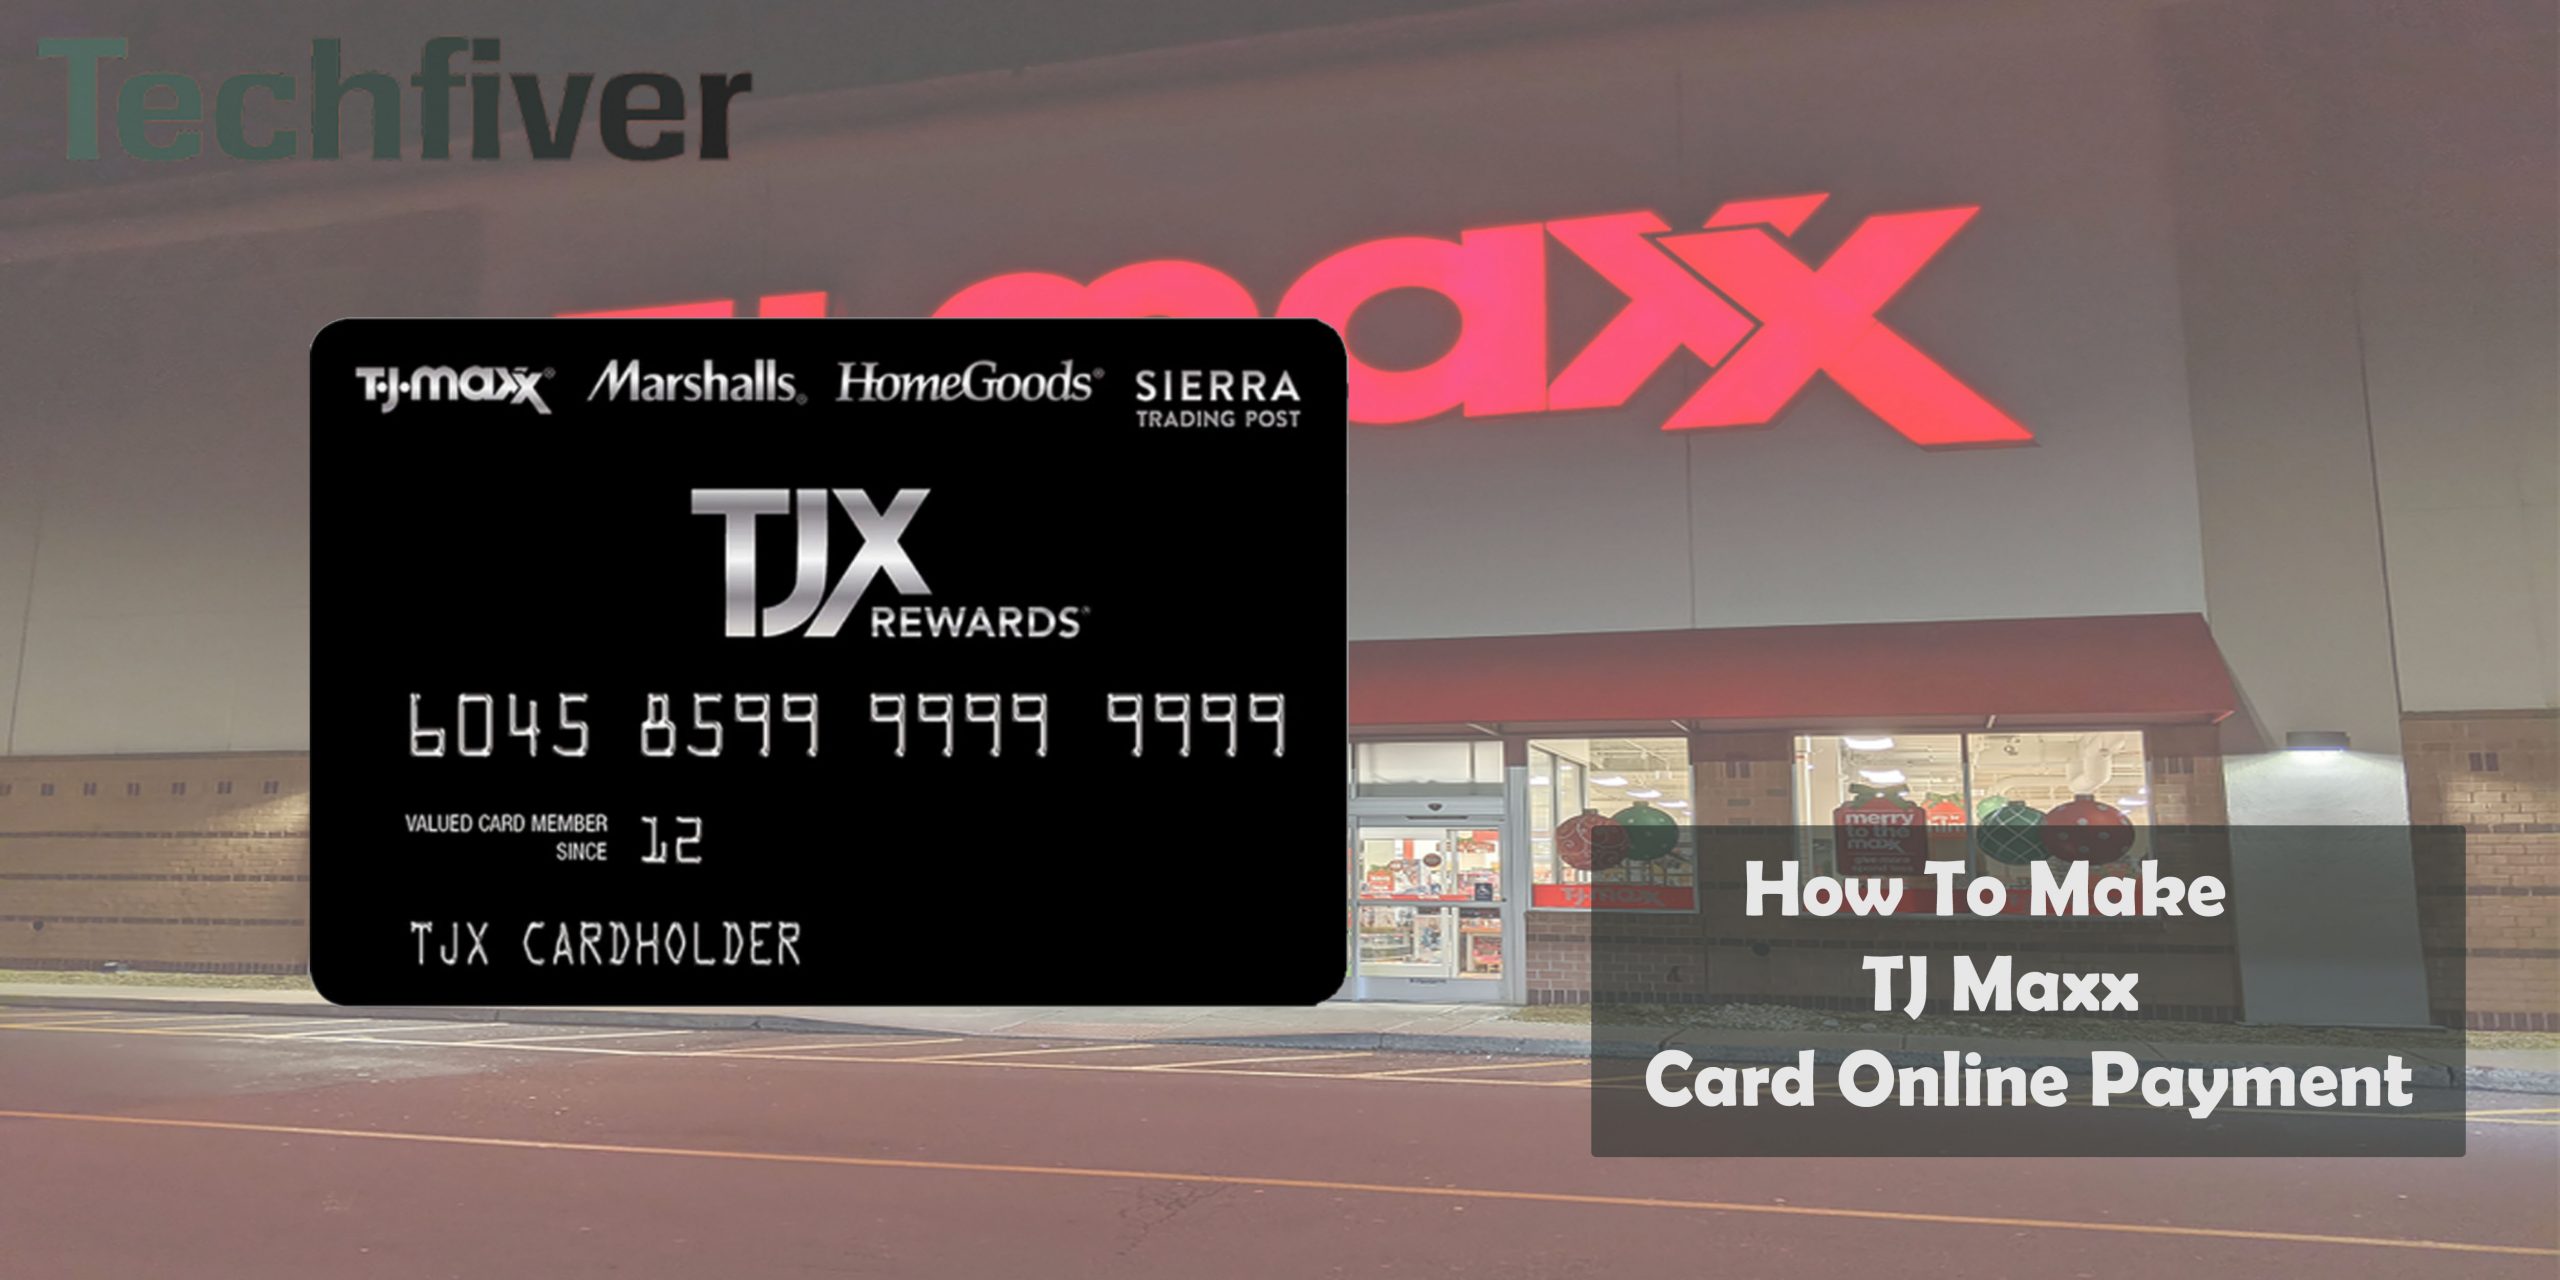 How To Make TJ Maxx Card Online Payment